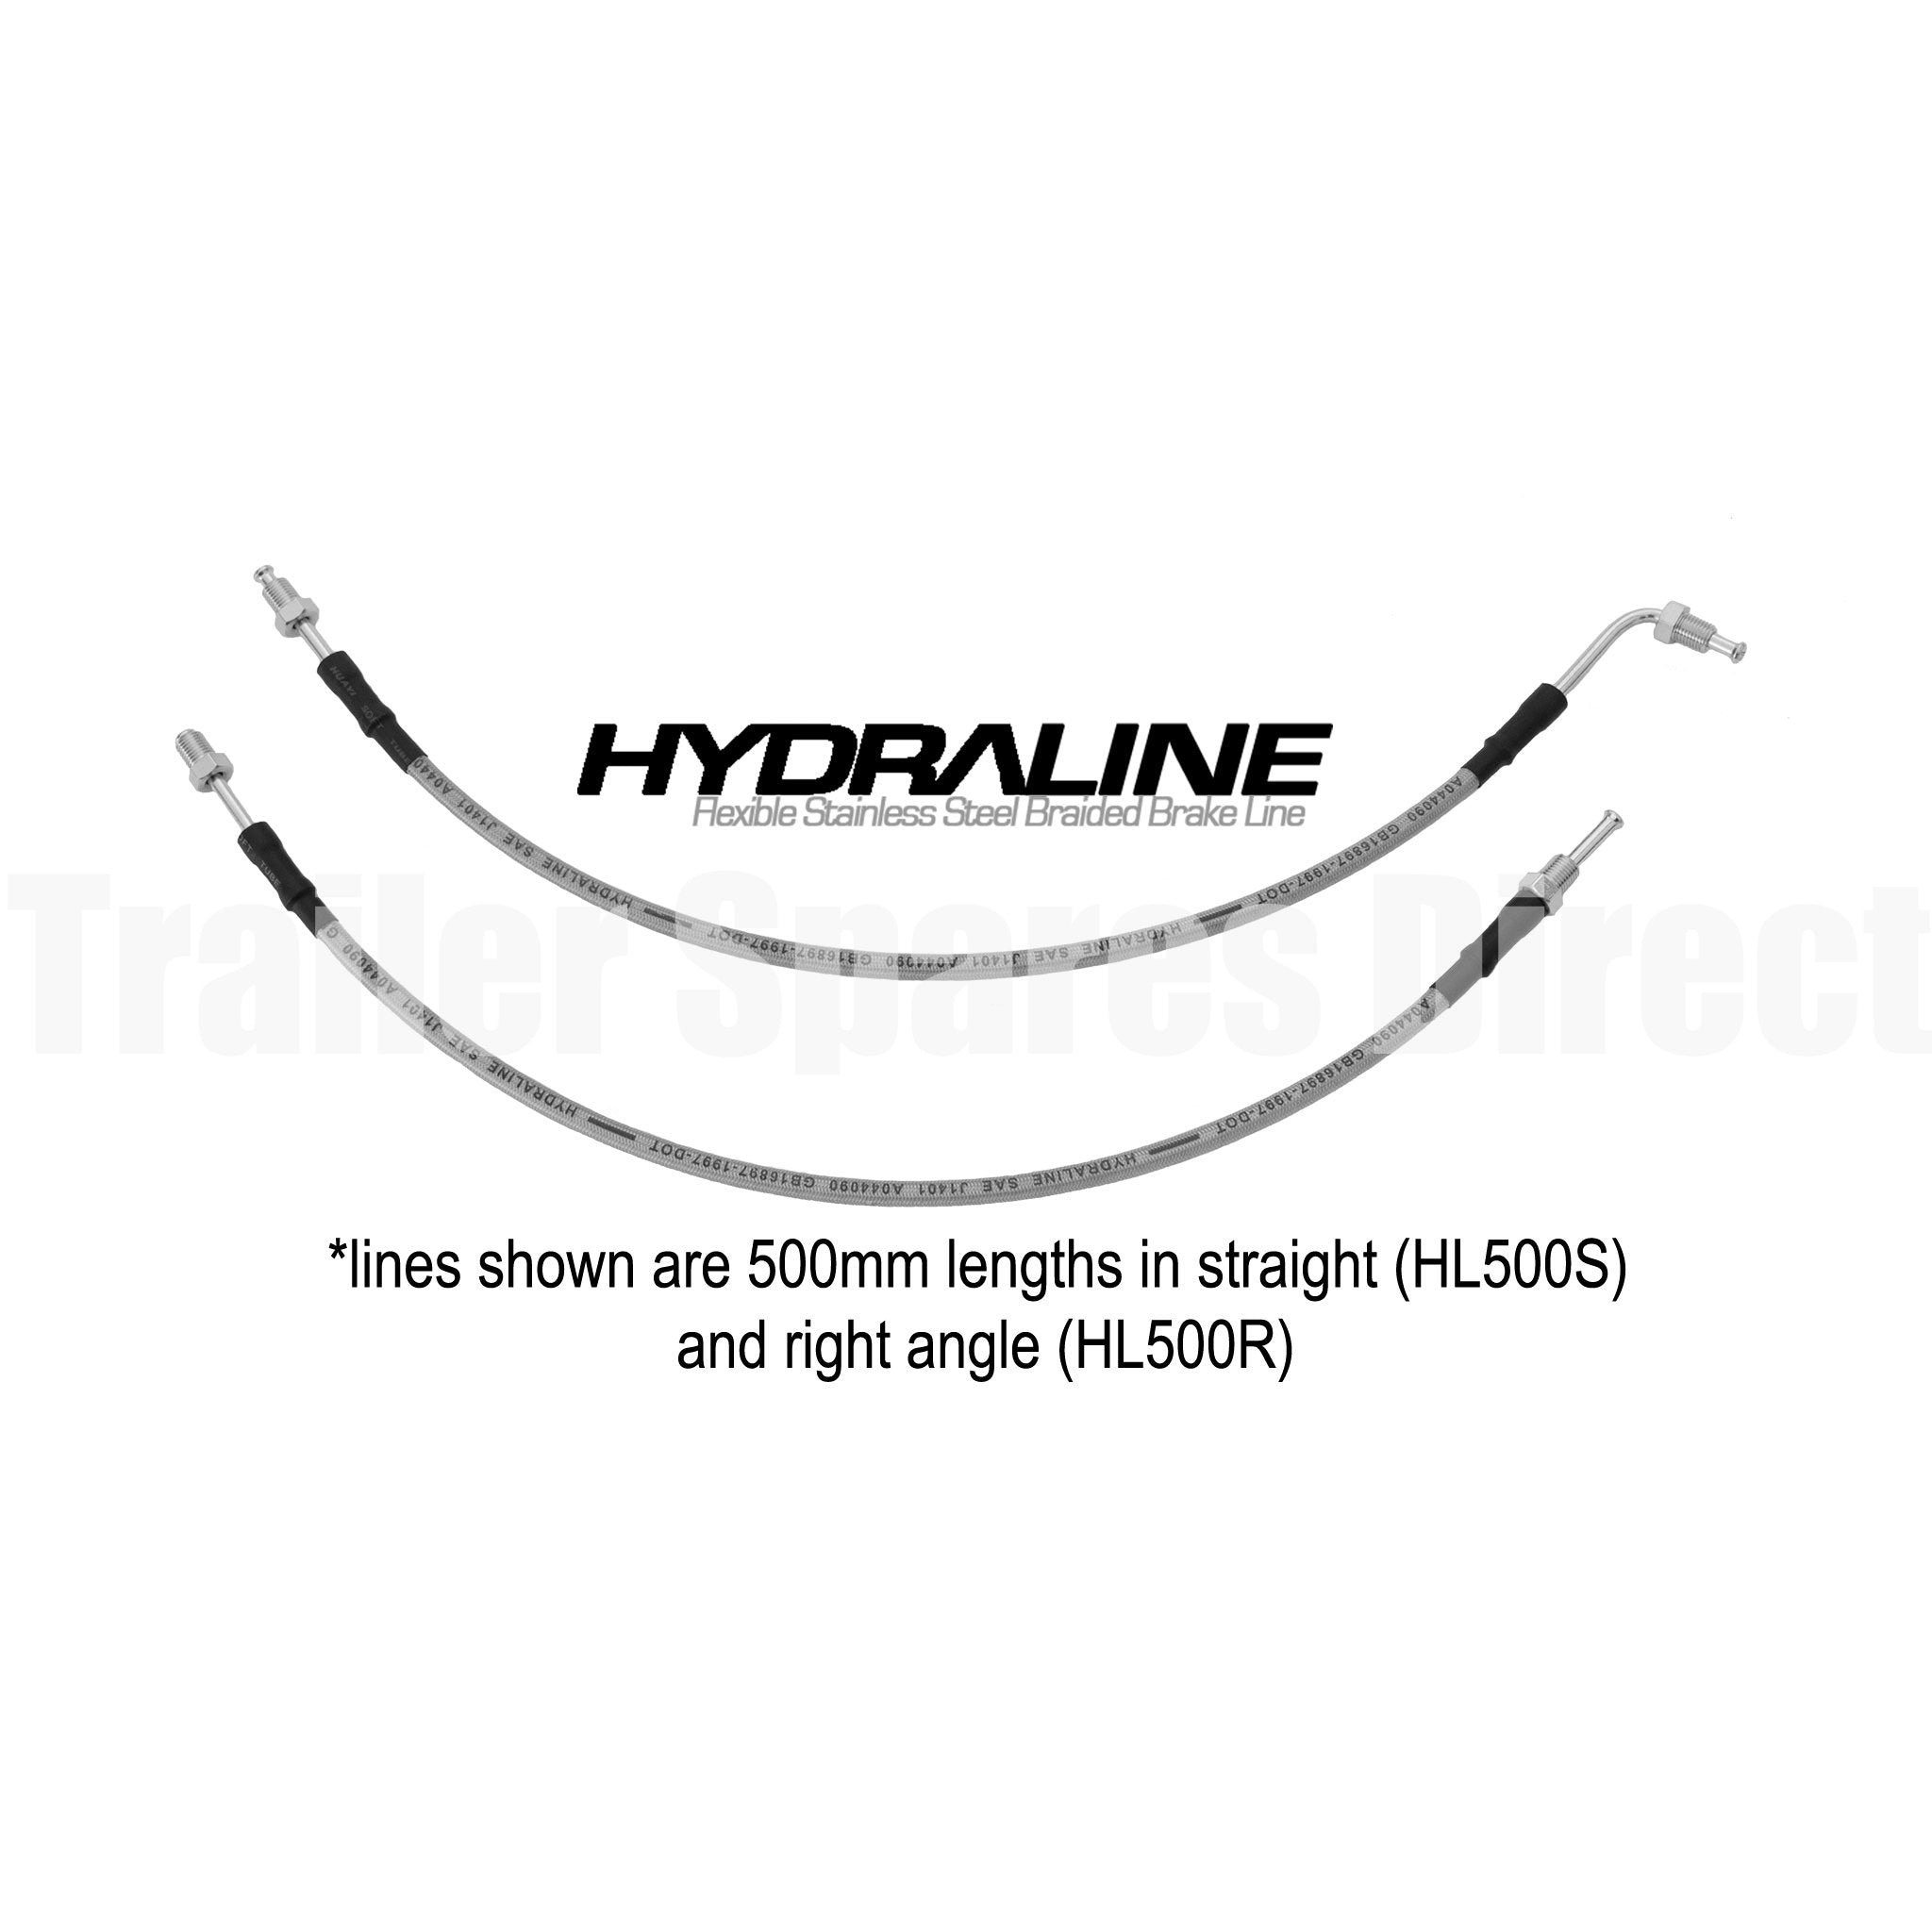 Tri-axle HydraLine kit with 7500mm lead line